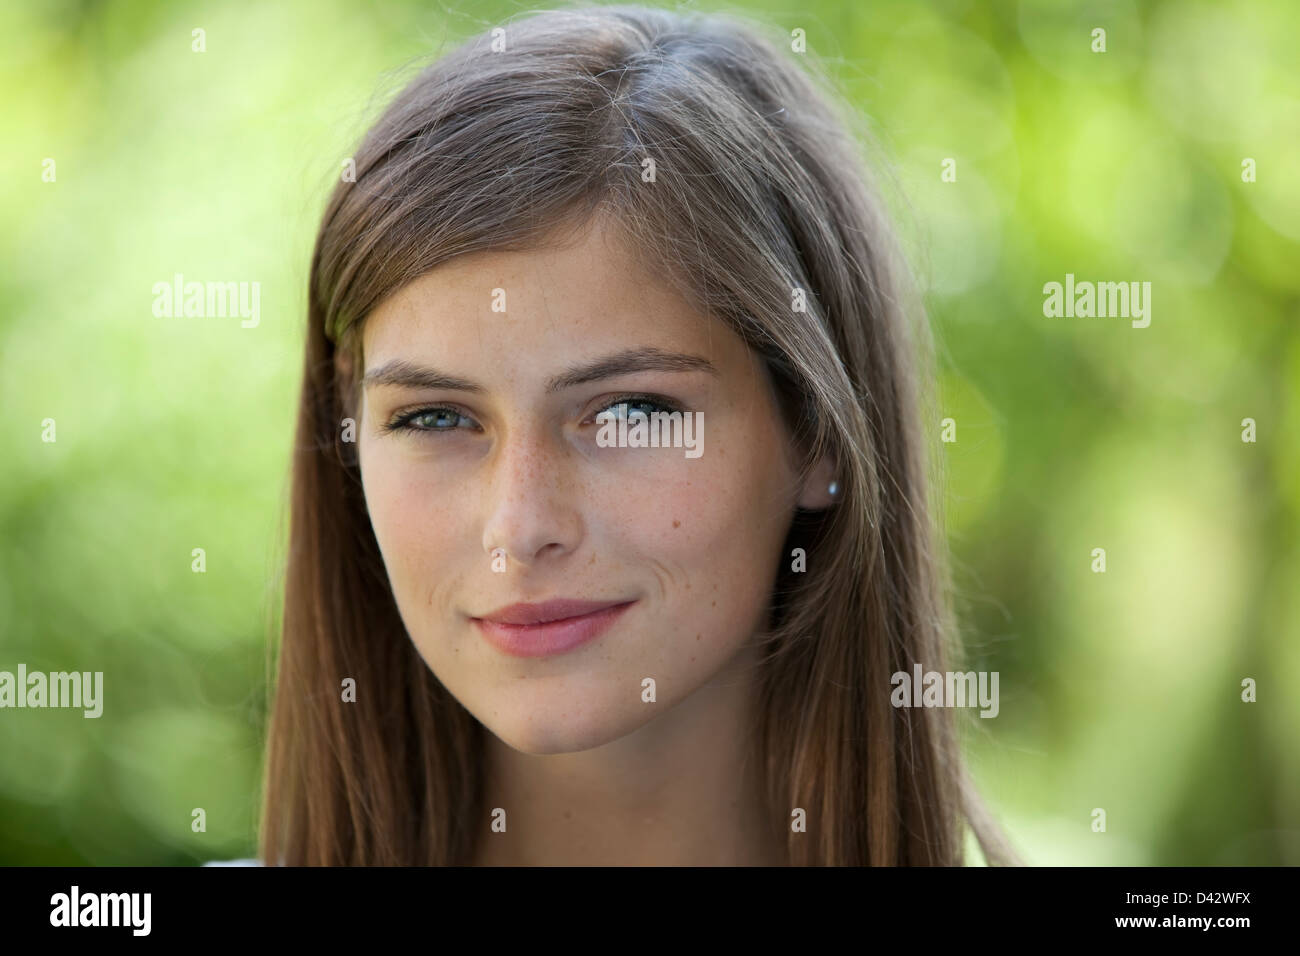 Freiburg, Germany, Portrait of a 16 year old girl ' Stock Photo